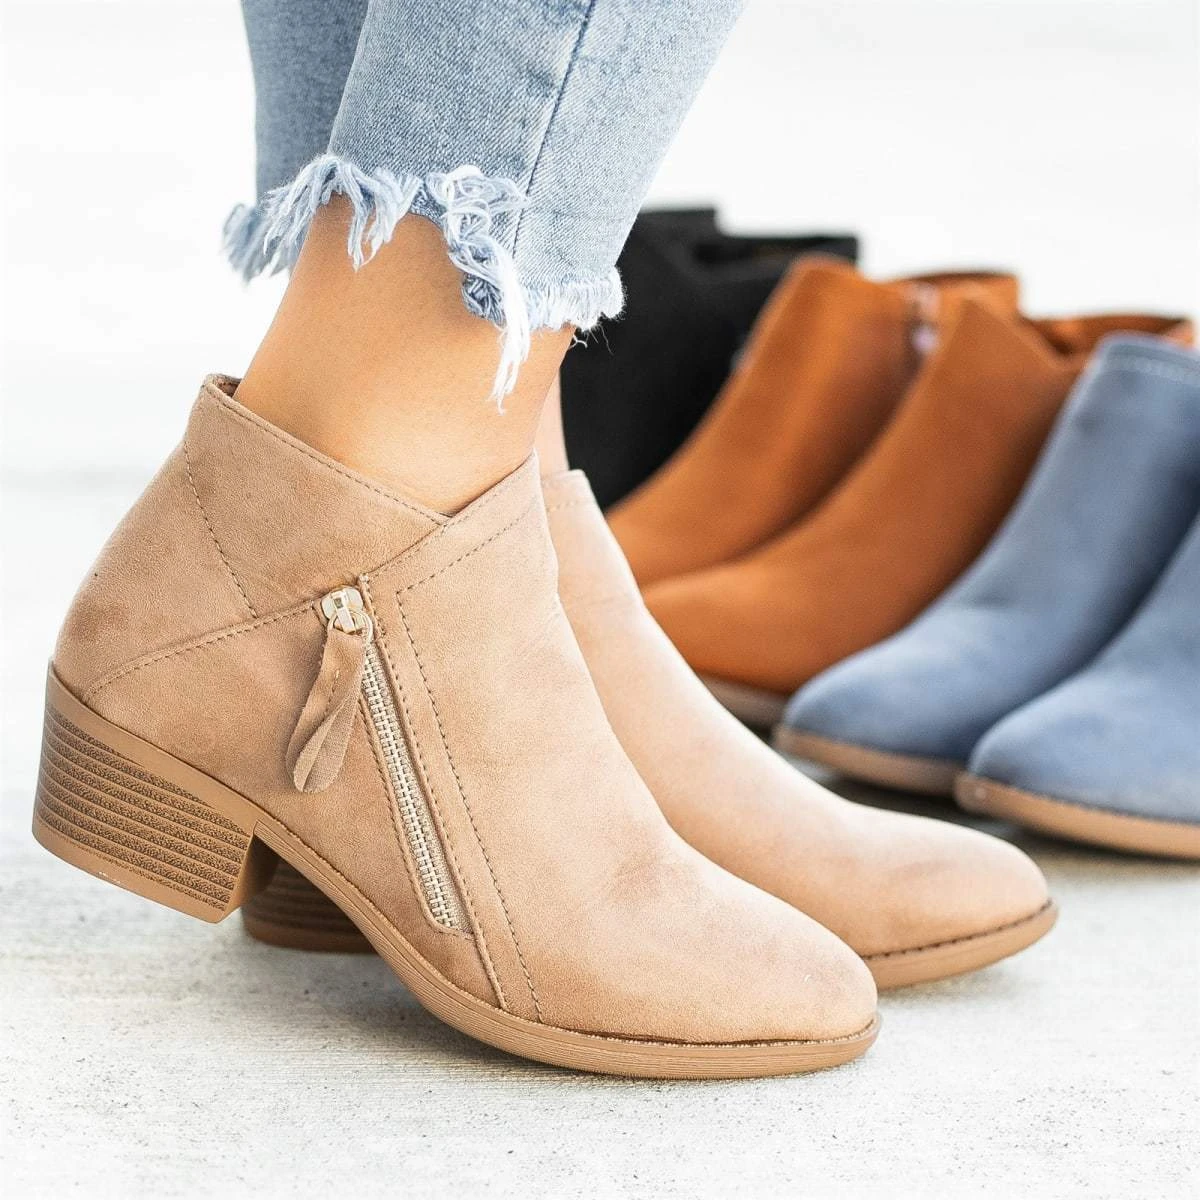 Women Side Zipper Boots Fashion Suede Low Heel Shoes Women Short Boots Square Heels Casual Ankle Boots Plus Size 43 botas mujer